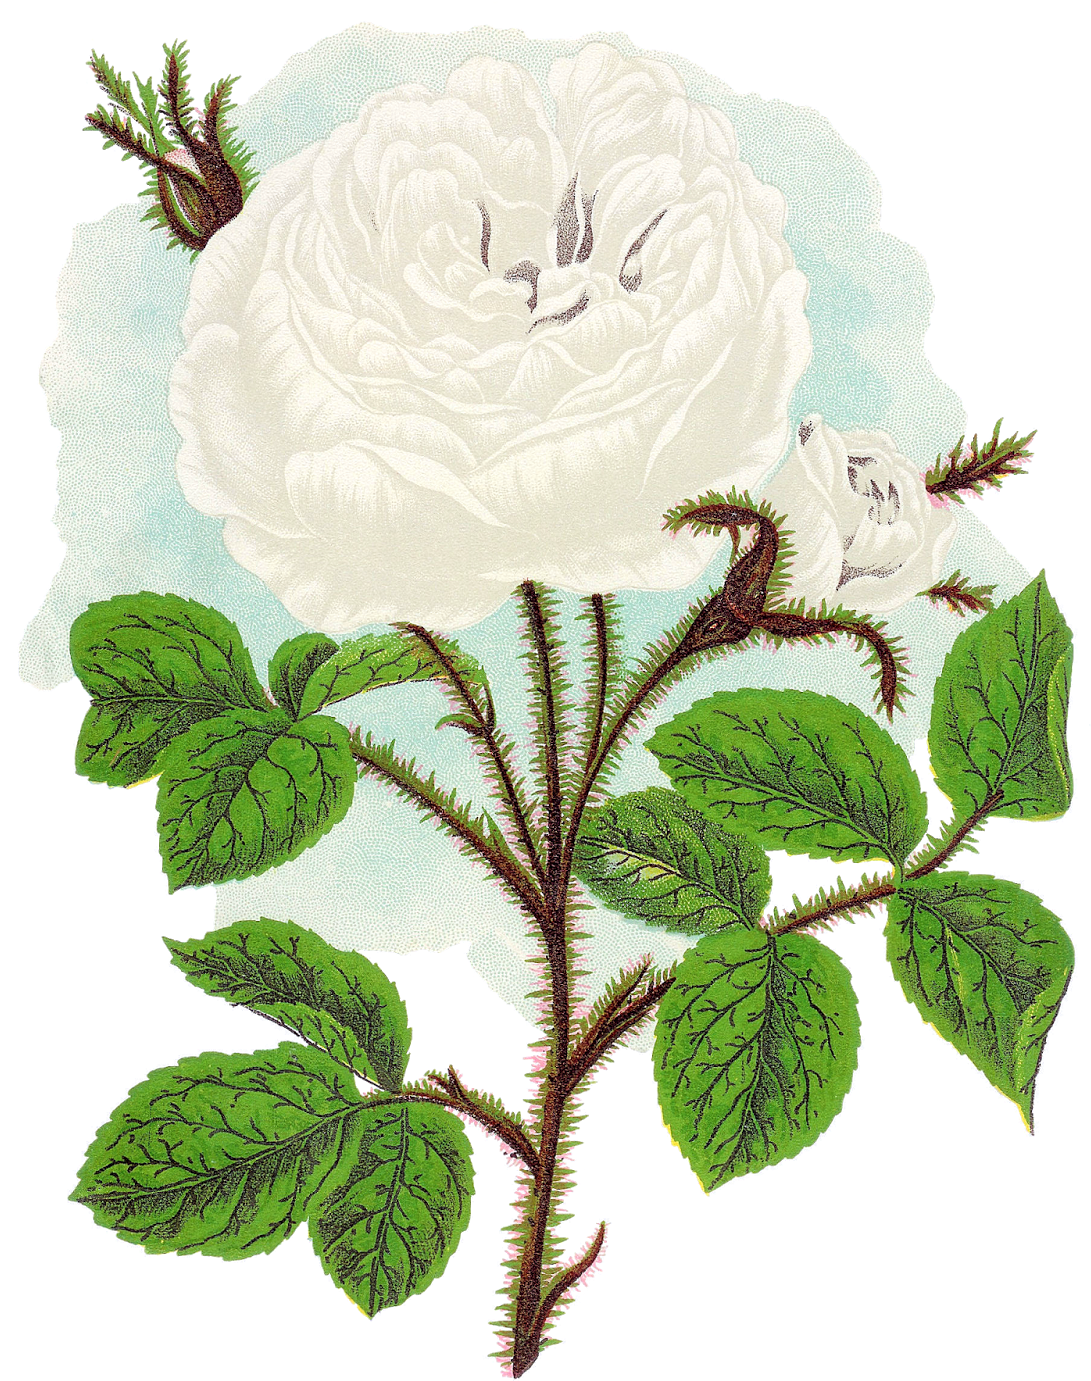 The Second Digital Flower Clip Art Is Of The White - Rose (1276x1600)